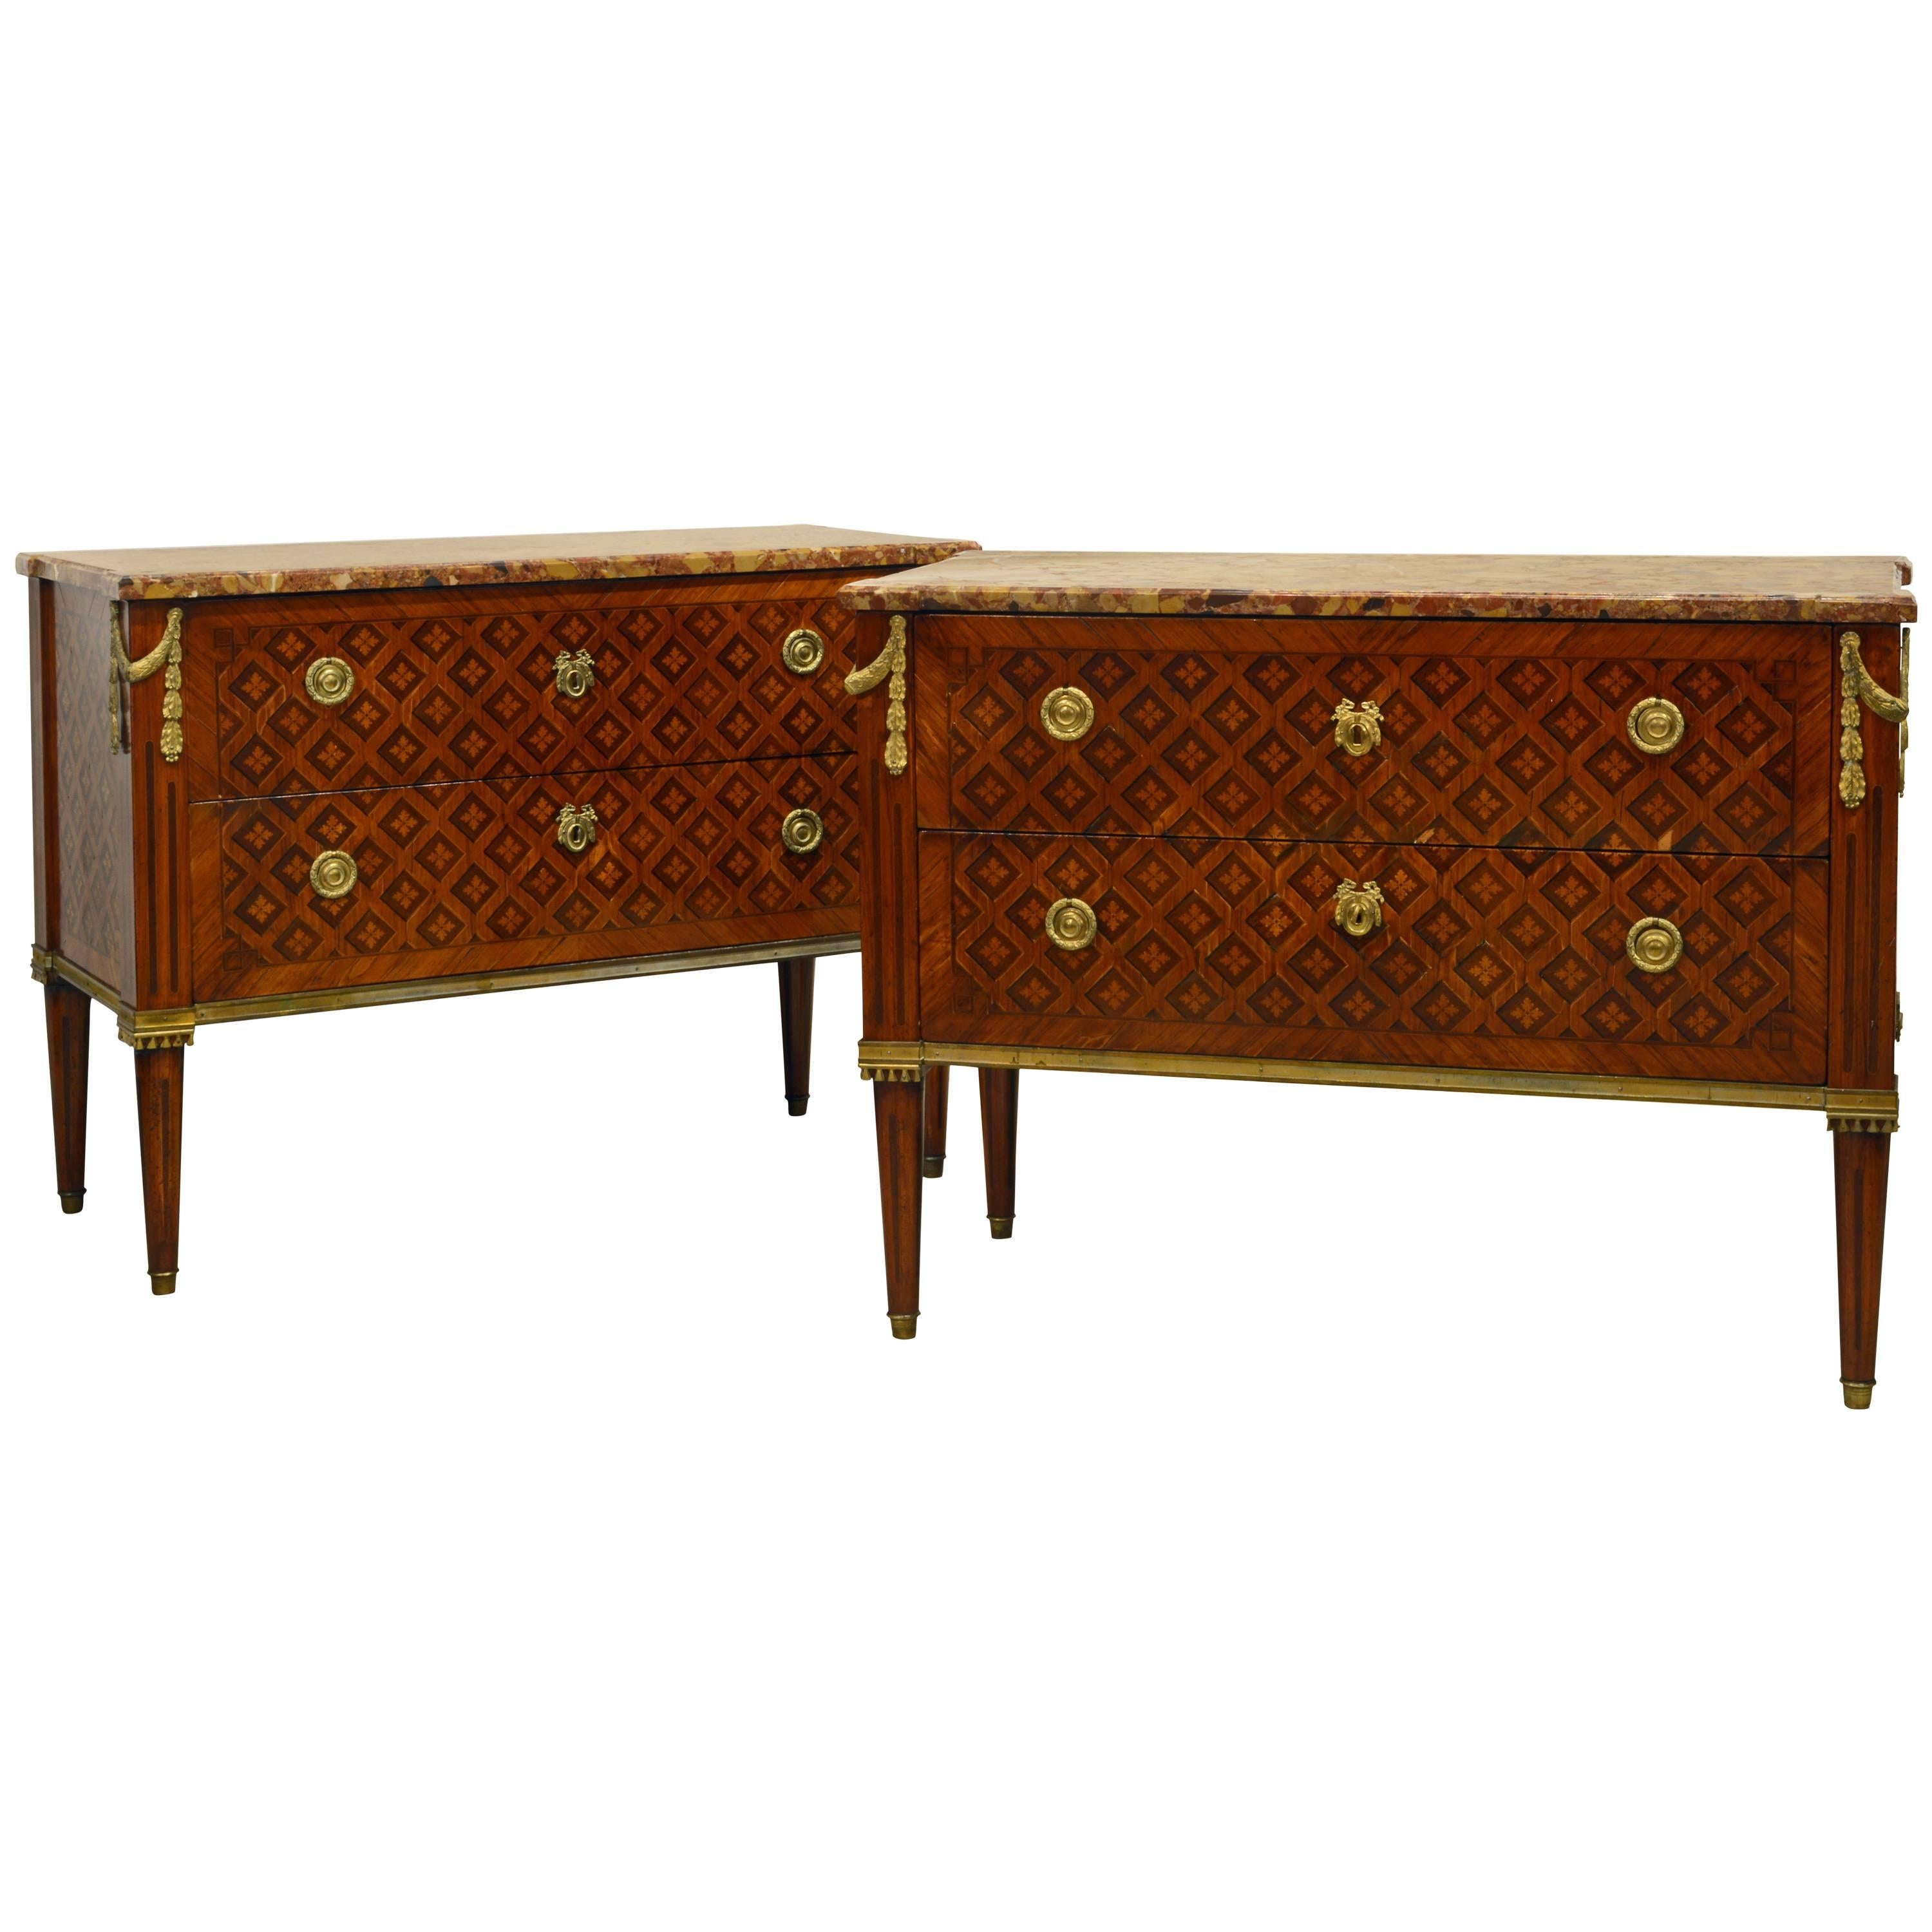 Pair of 18th Century Louis XVI Ormolu-Mounted Marquetry and Marble Top Commodes